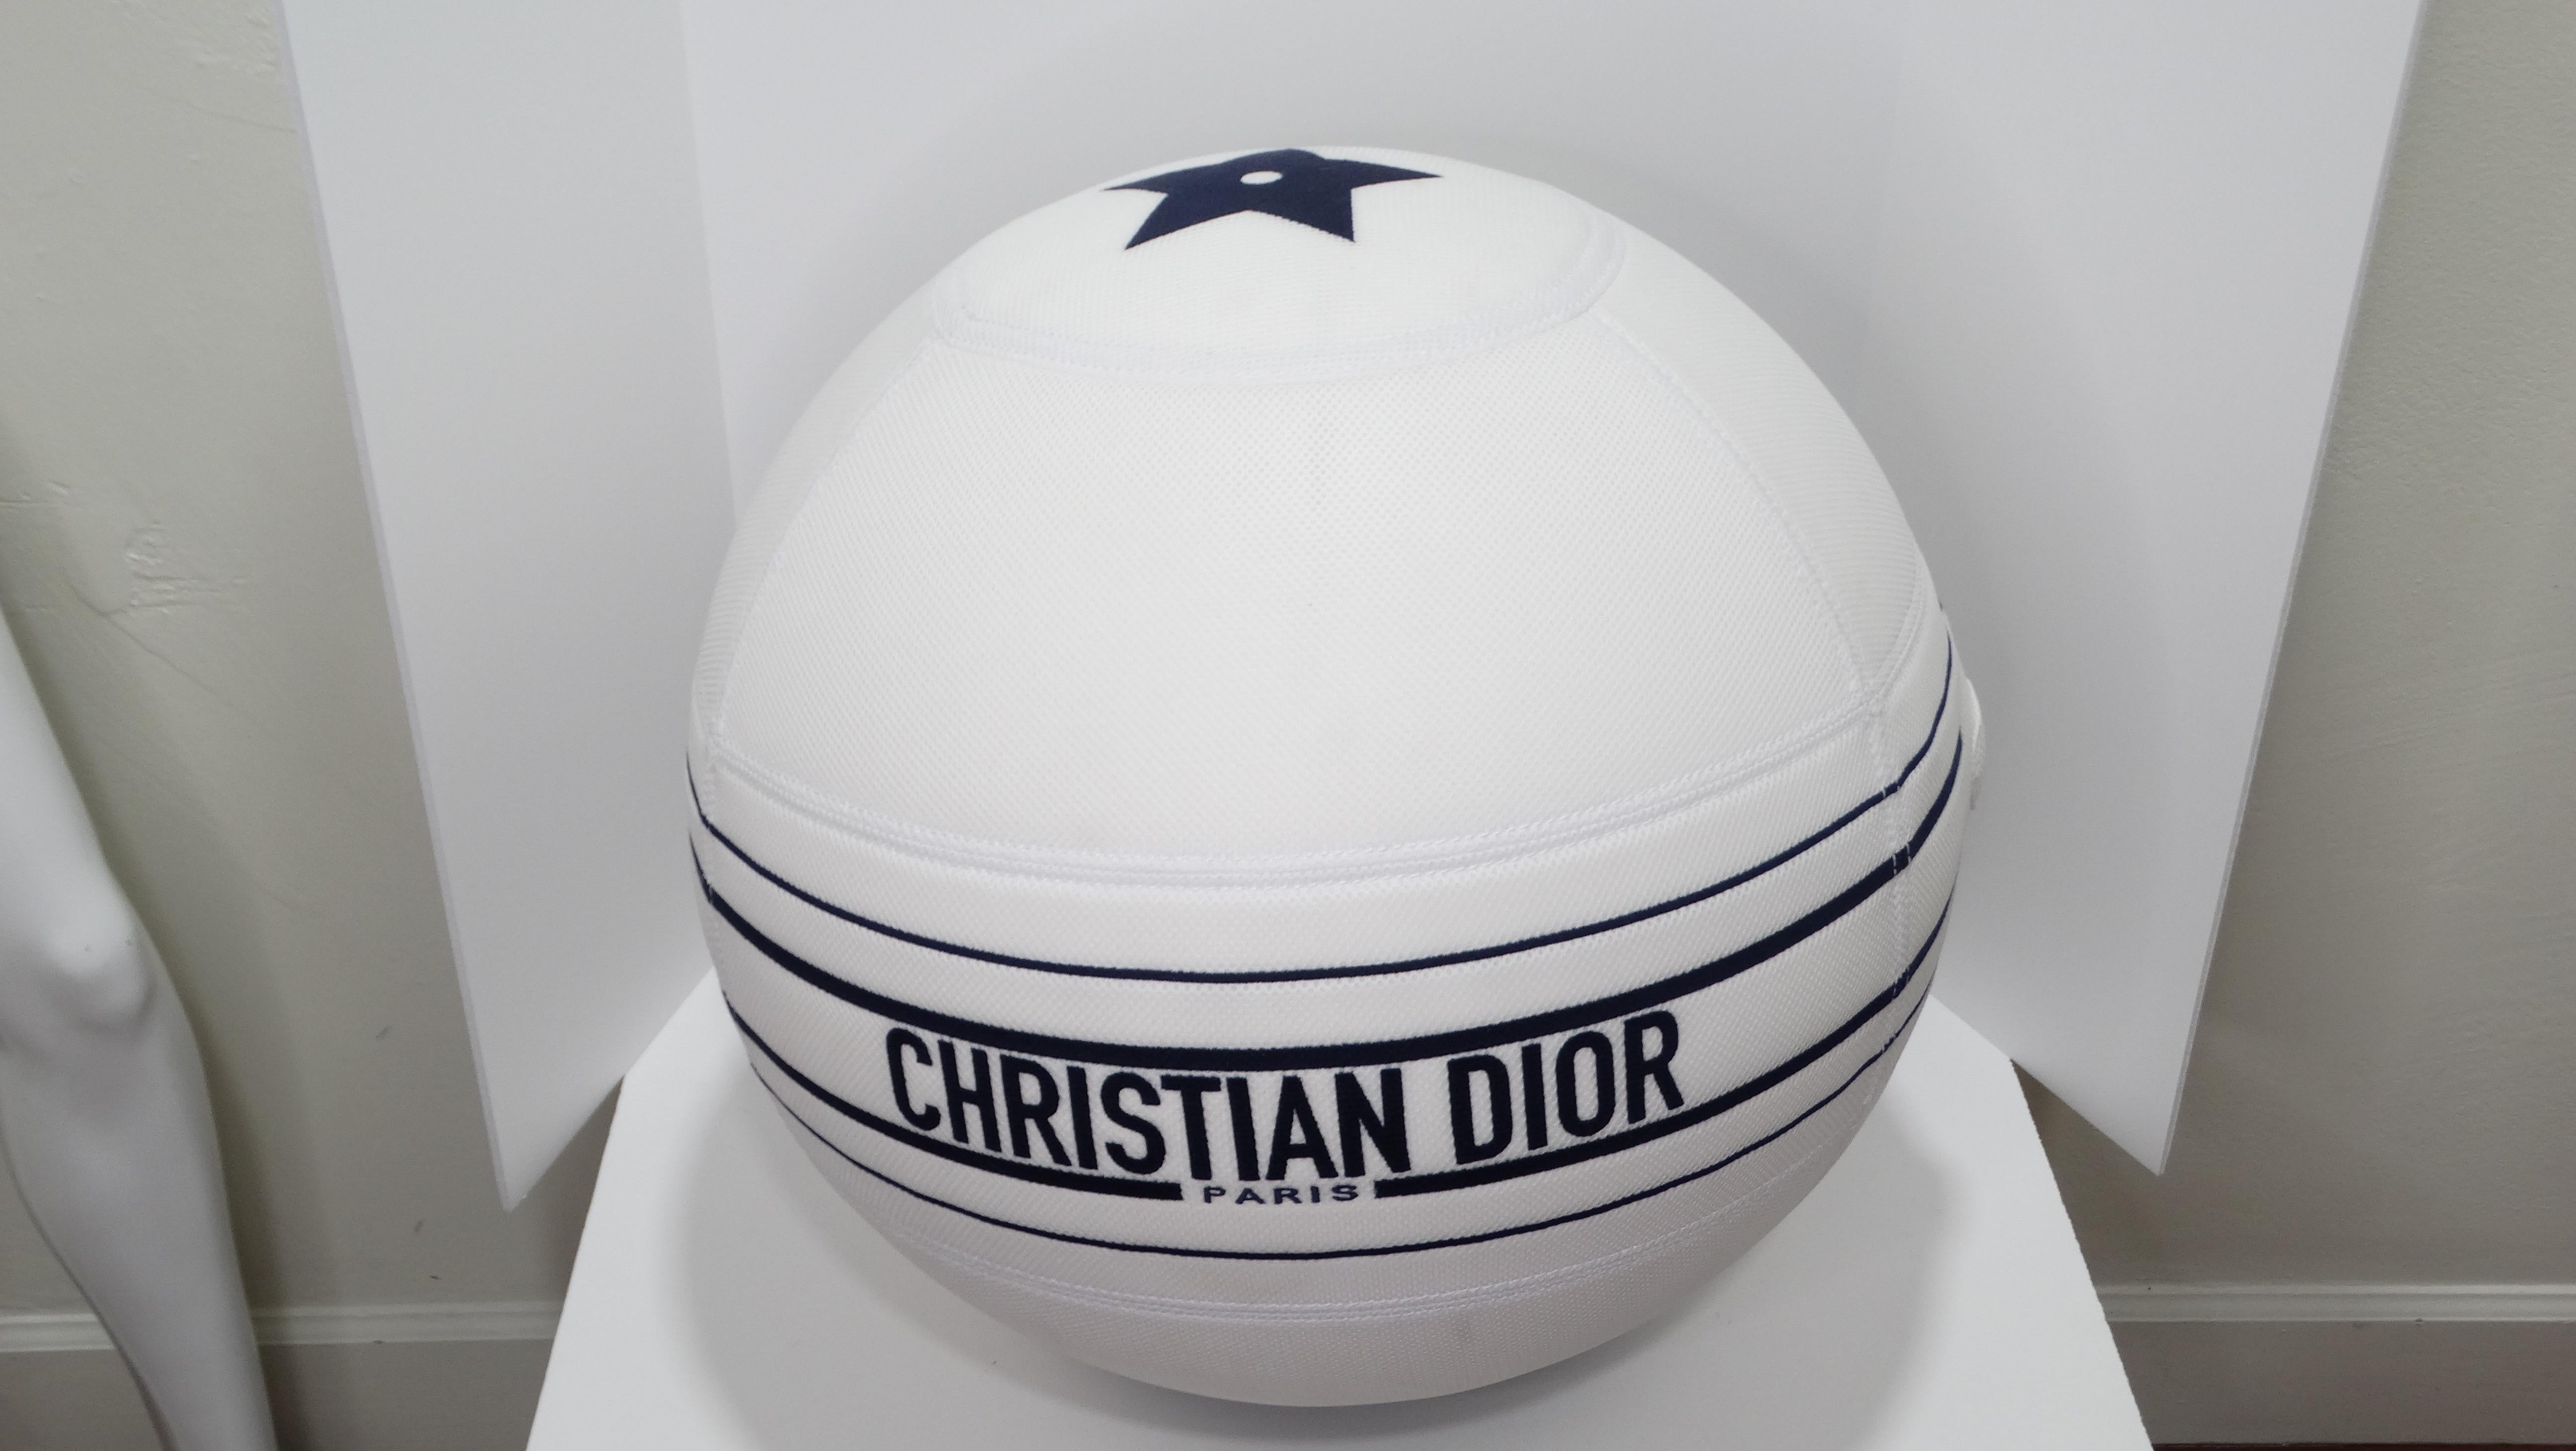 Elevate your workout / home decor game with this absolutely incredible limited edition Dior White Logo Technogym Gym Ball for Dior Yoga 1D129! Large white medicine ball features a signature Dior star at the top, 'CHRISTIAN DIOR PARIS' in bold